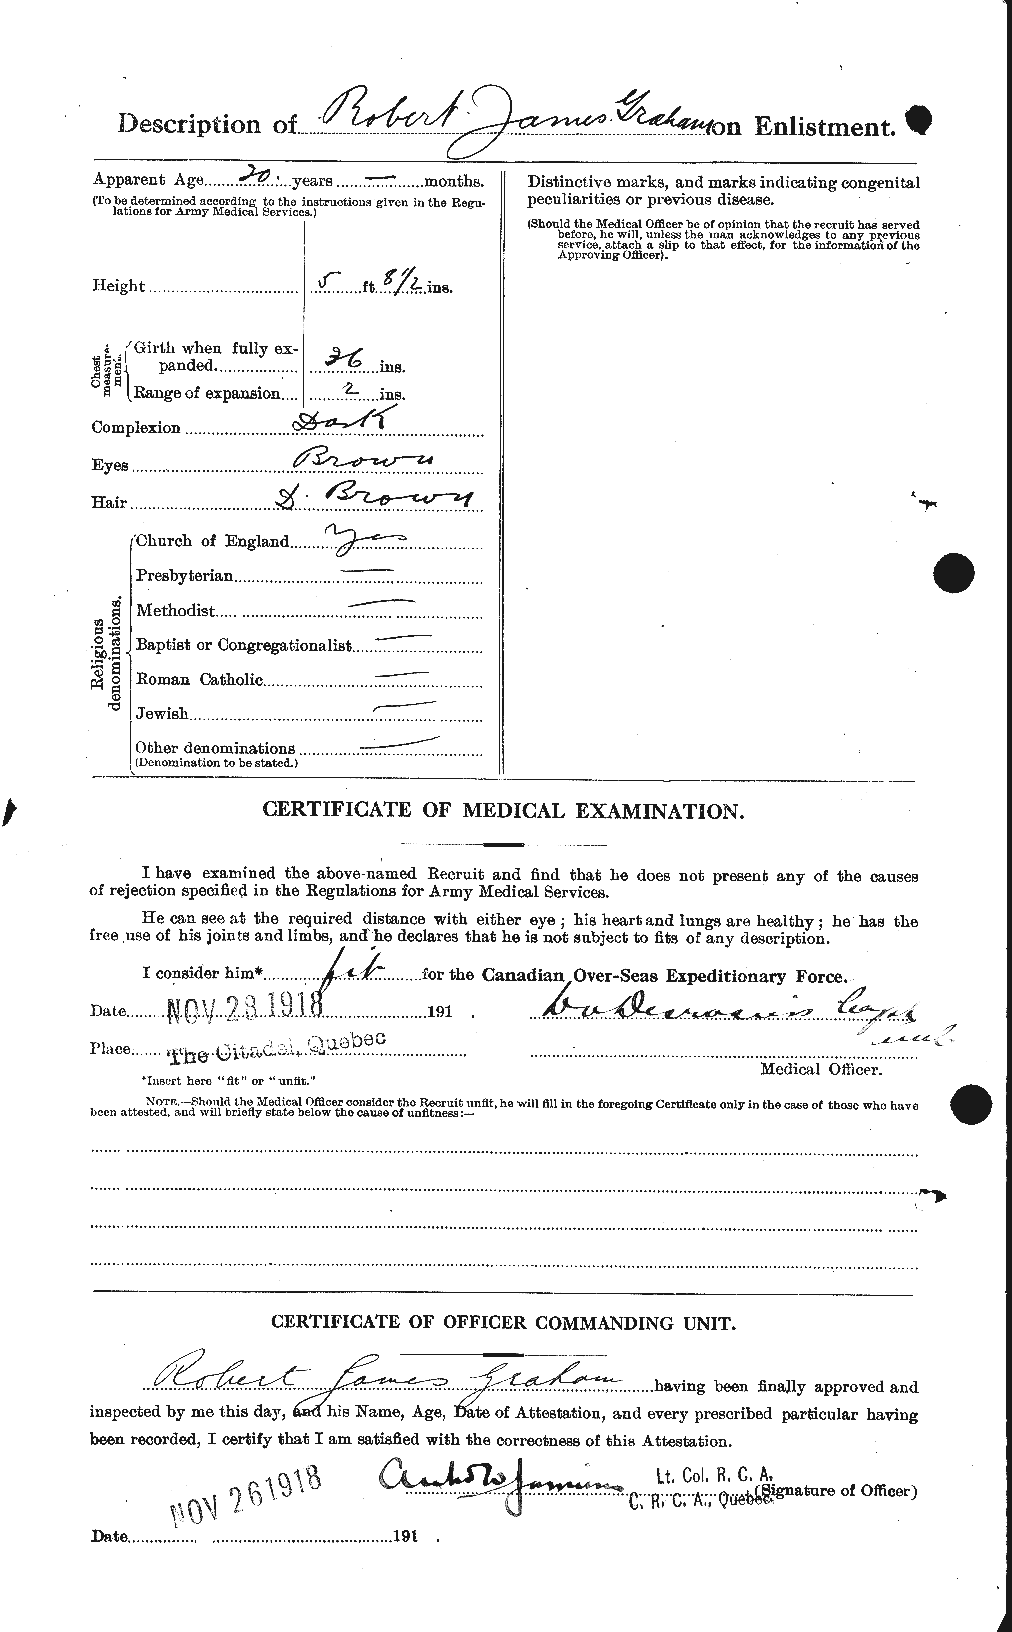 Personnel Records of the First World War - CEF 359409b